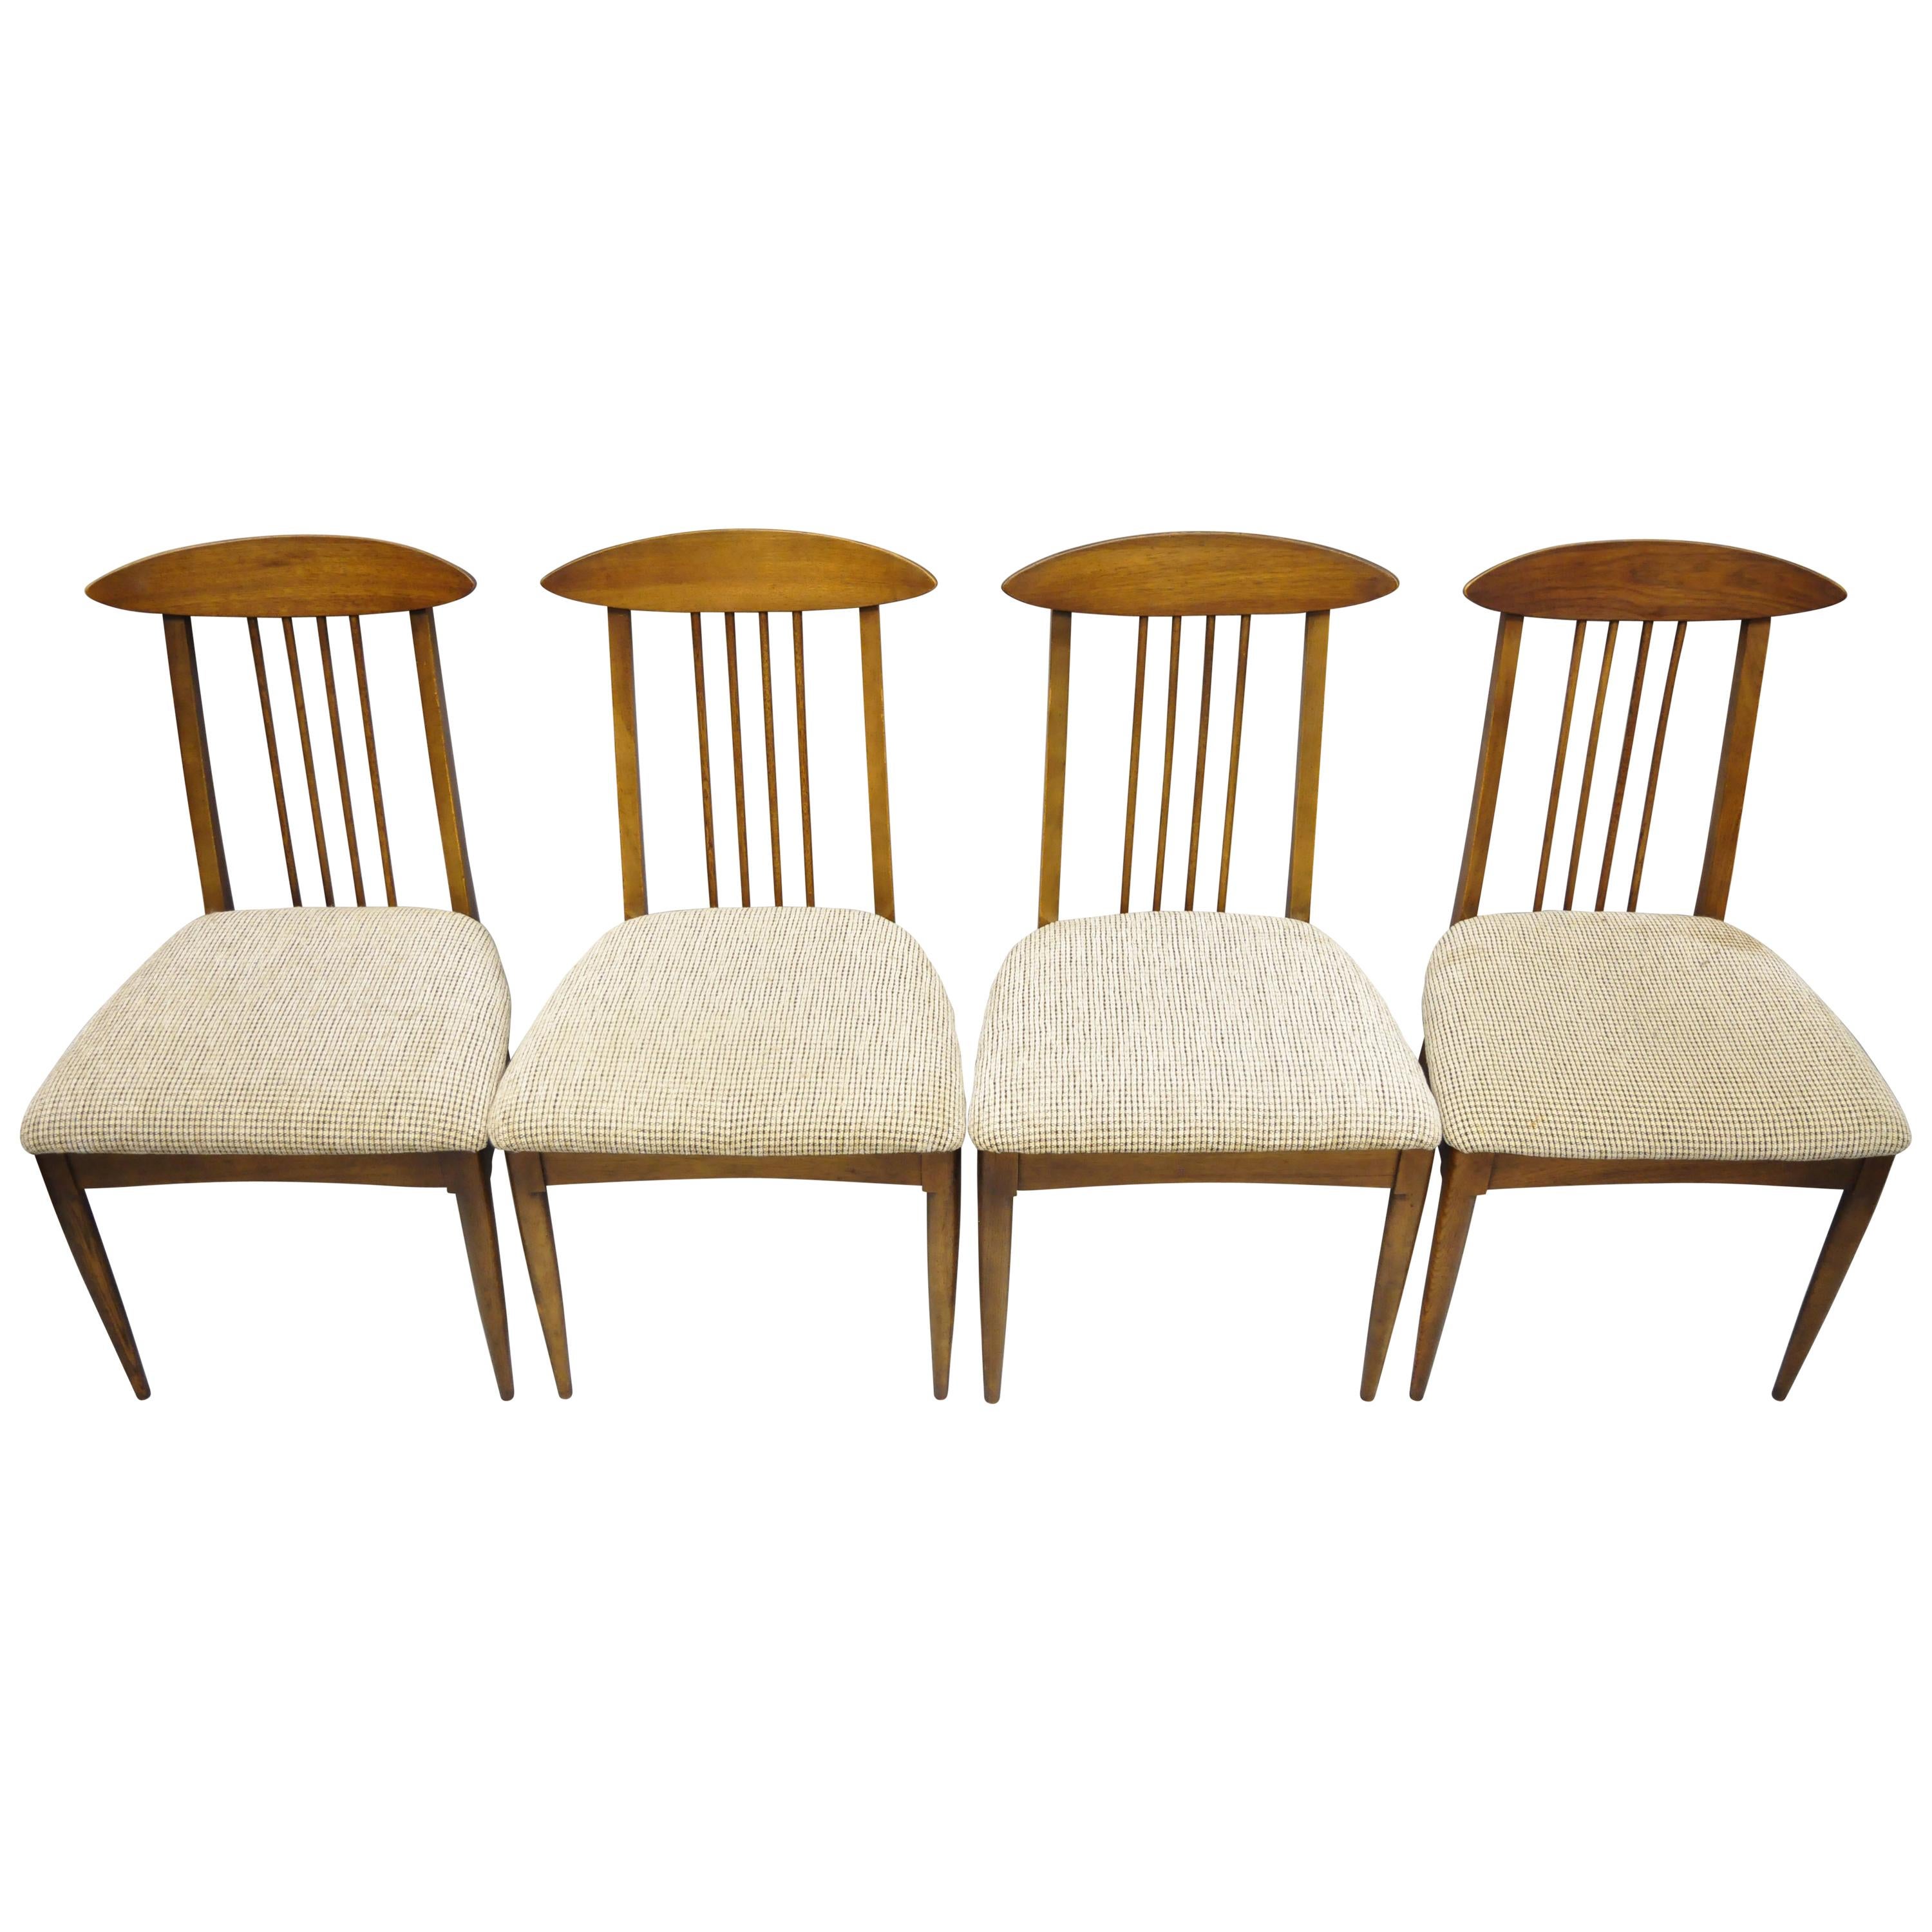 Set of Four Vintage Mid-Century Modern Walnut Spindle Back Dining Chairs  For Sale at 1stDibs | vintage mid century modern dining chairs, vintage  walnut dining chairs, mid century modern chairs vintage